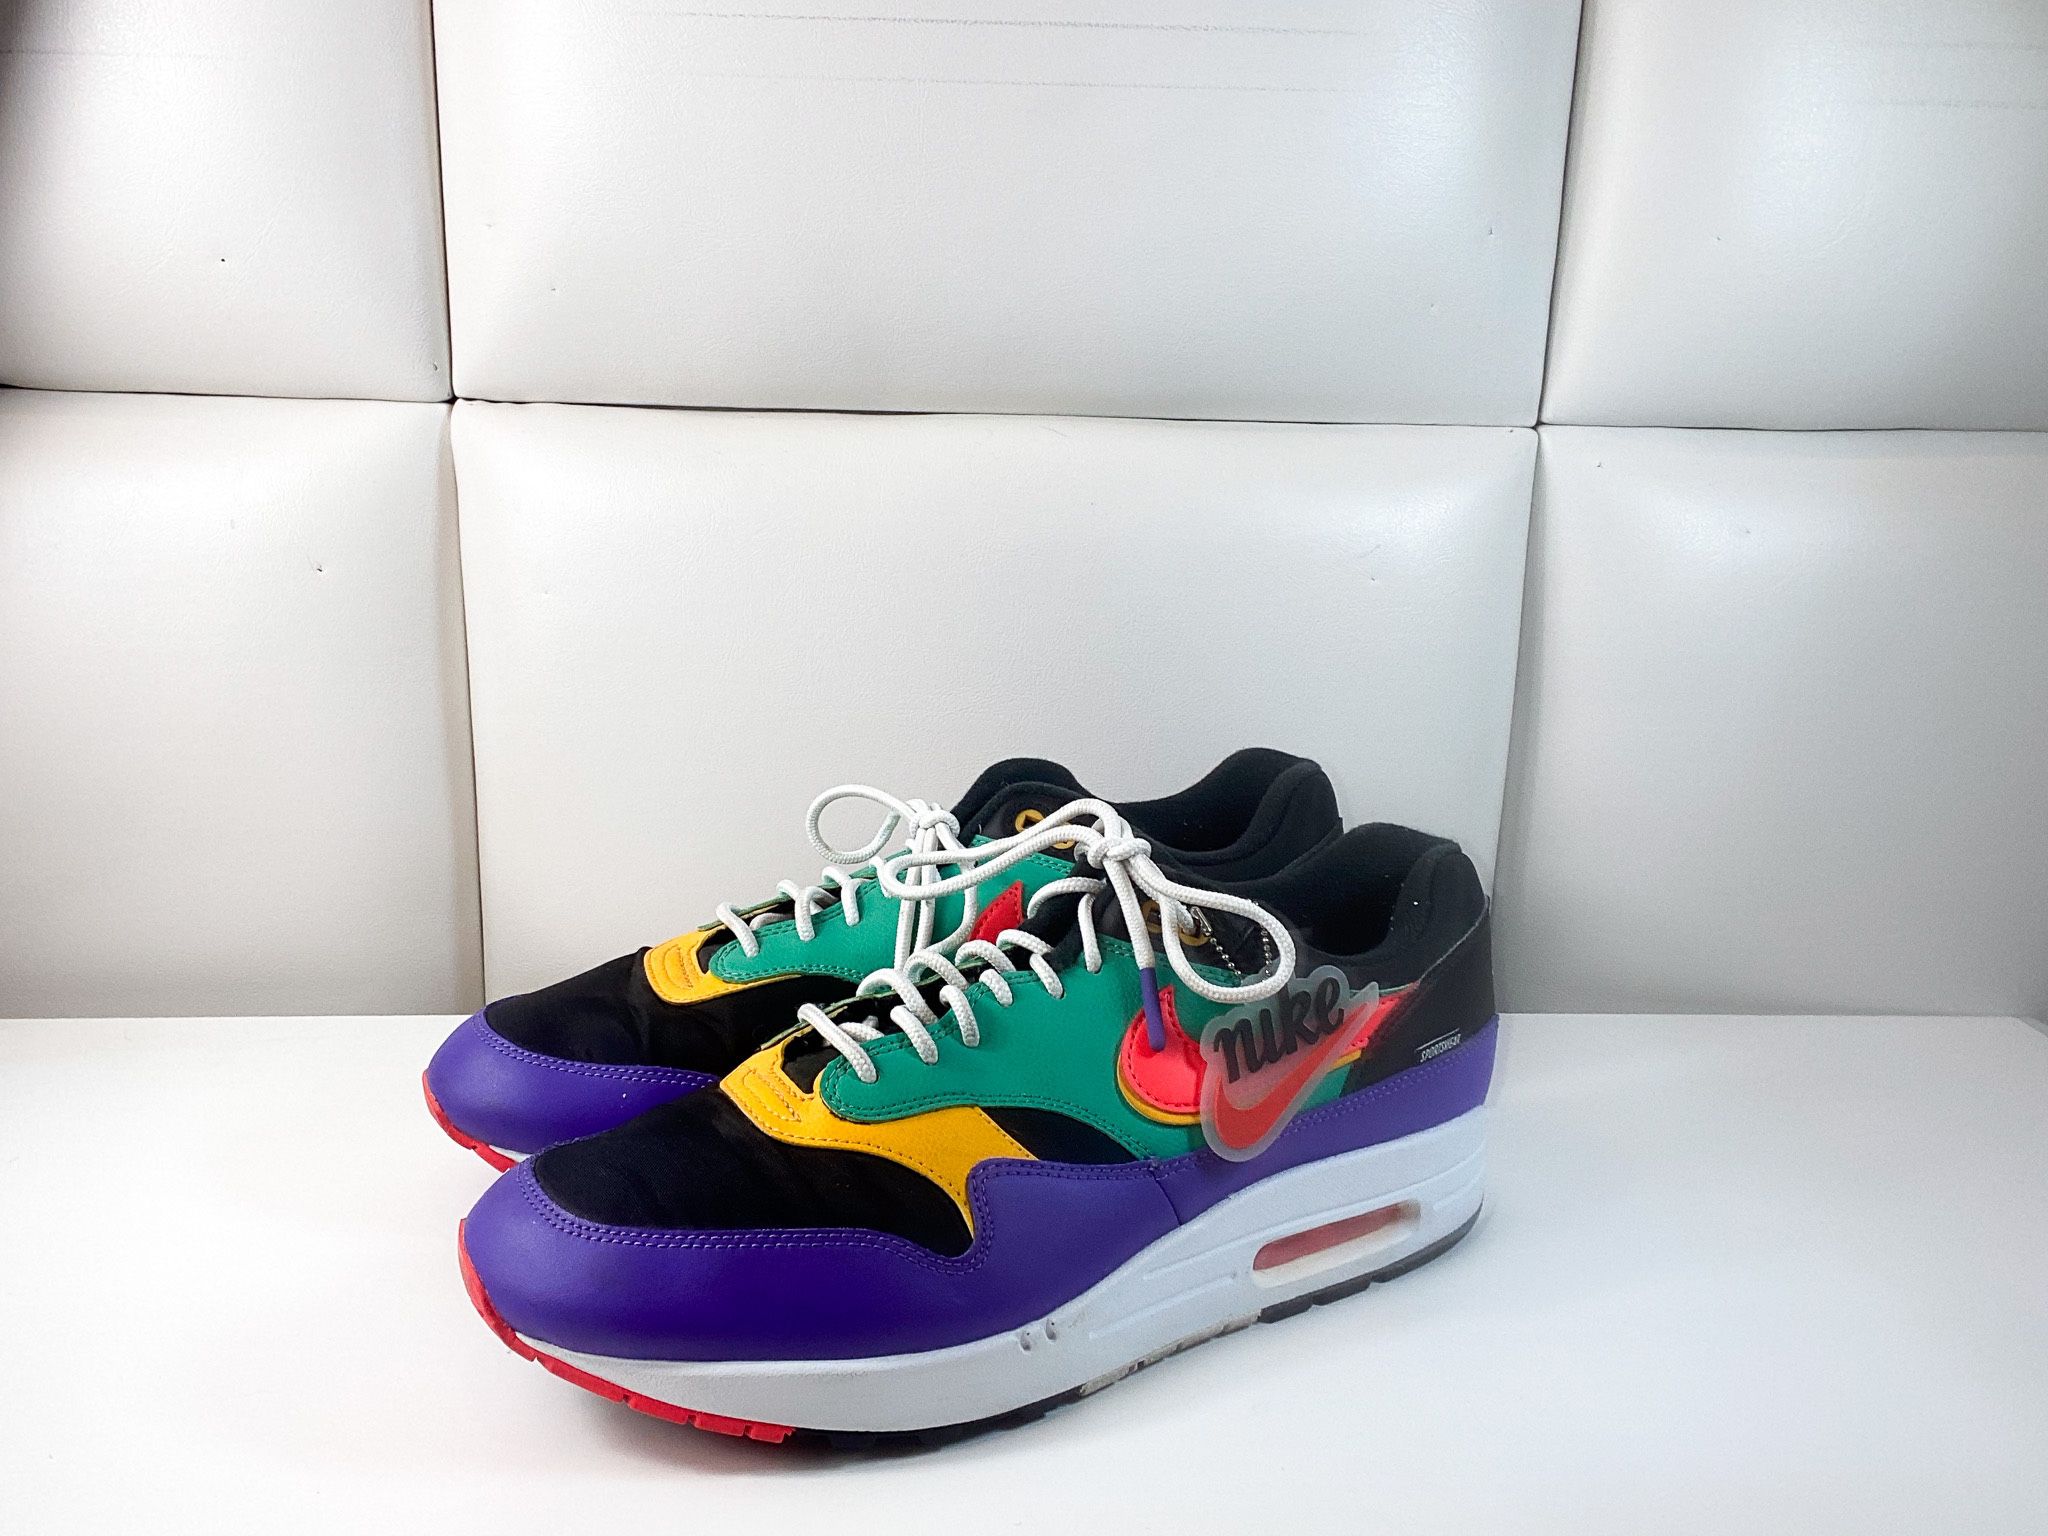 Nike Air Max “Windbreaker” for Sale - OfferUp